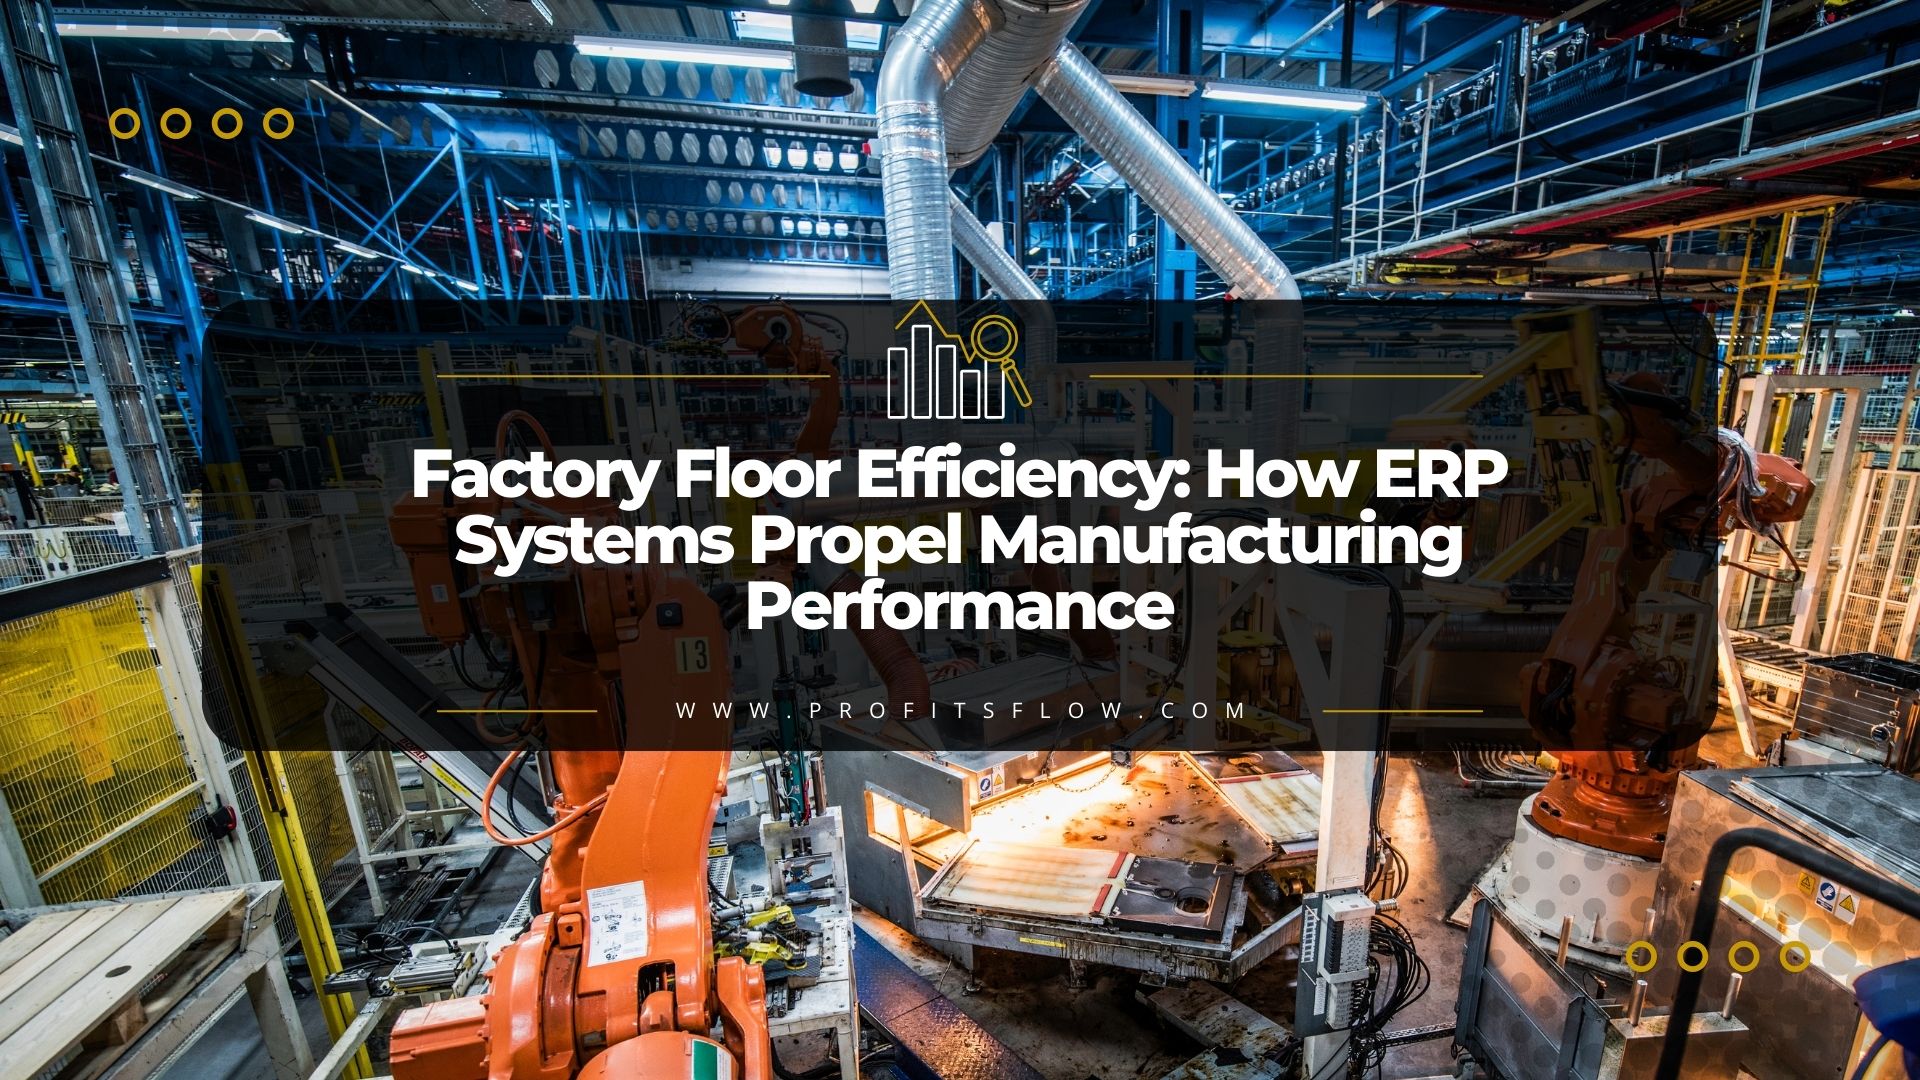 Factory Floor Efficiency: How ERP Systems Propel Manufacturing Performance